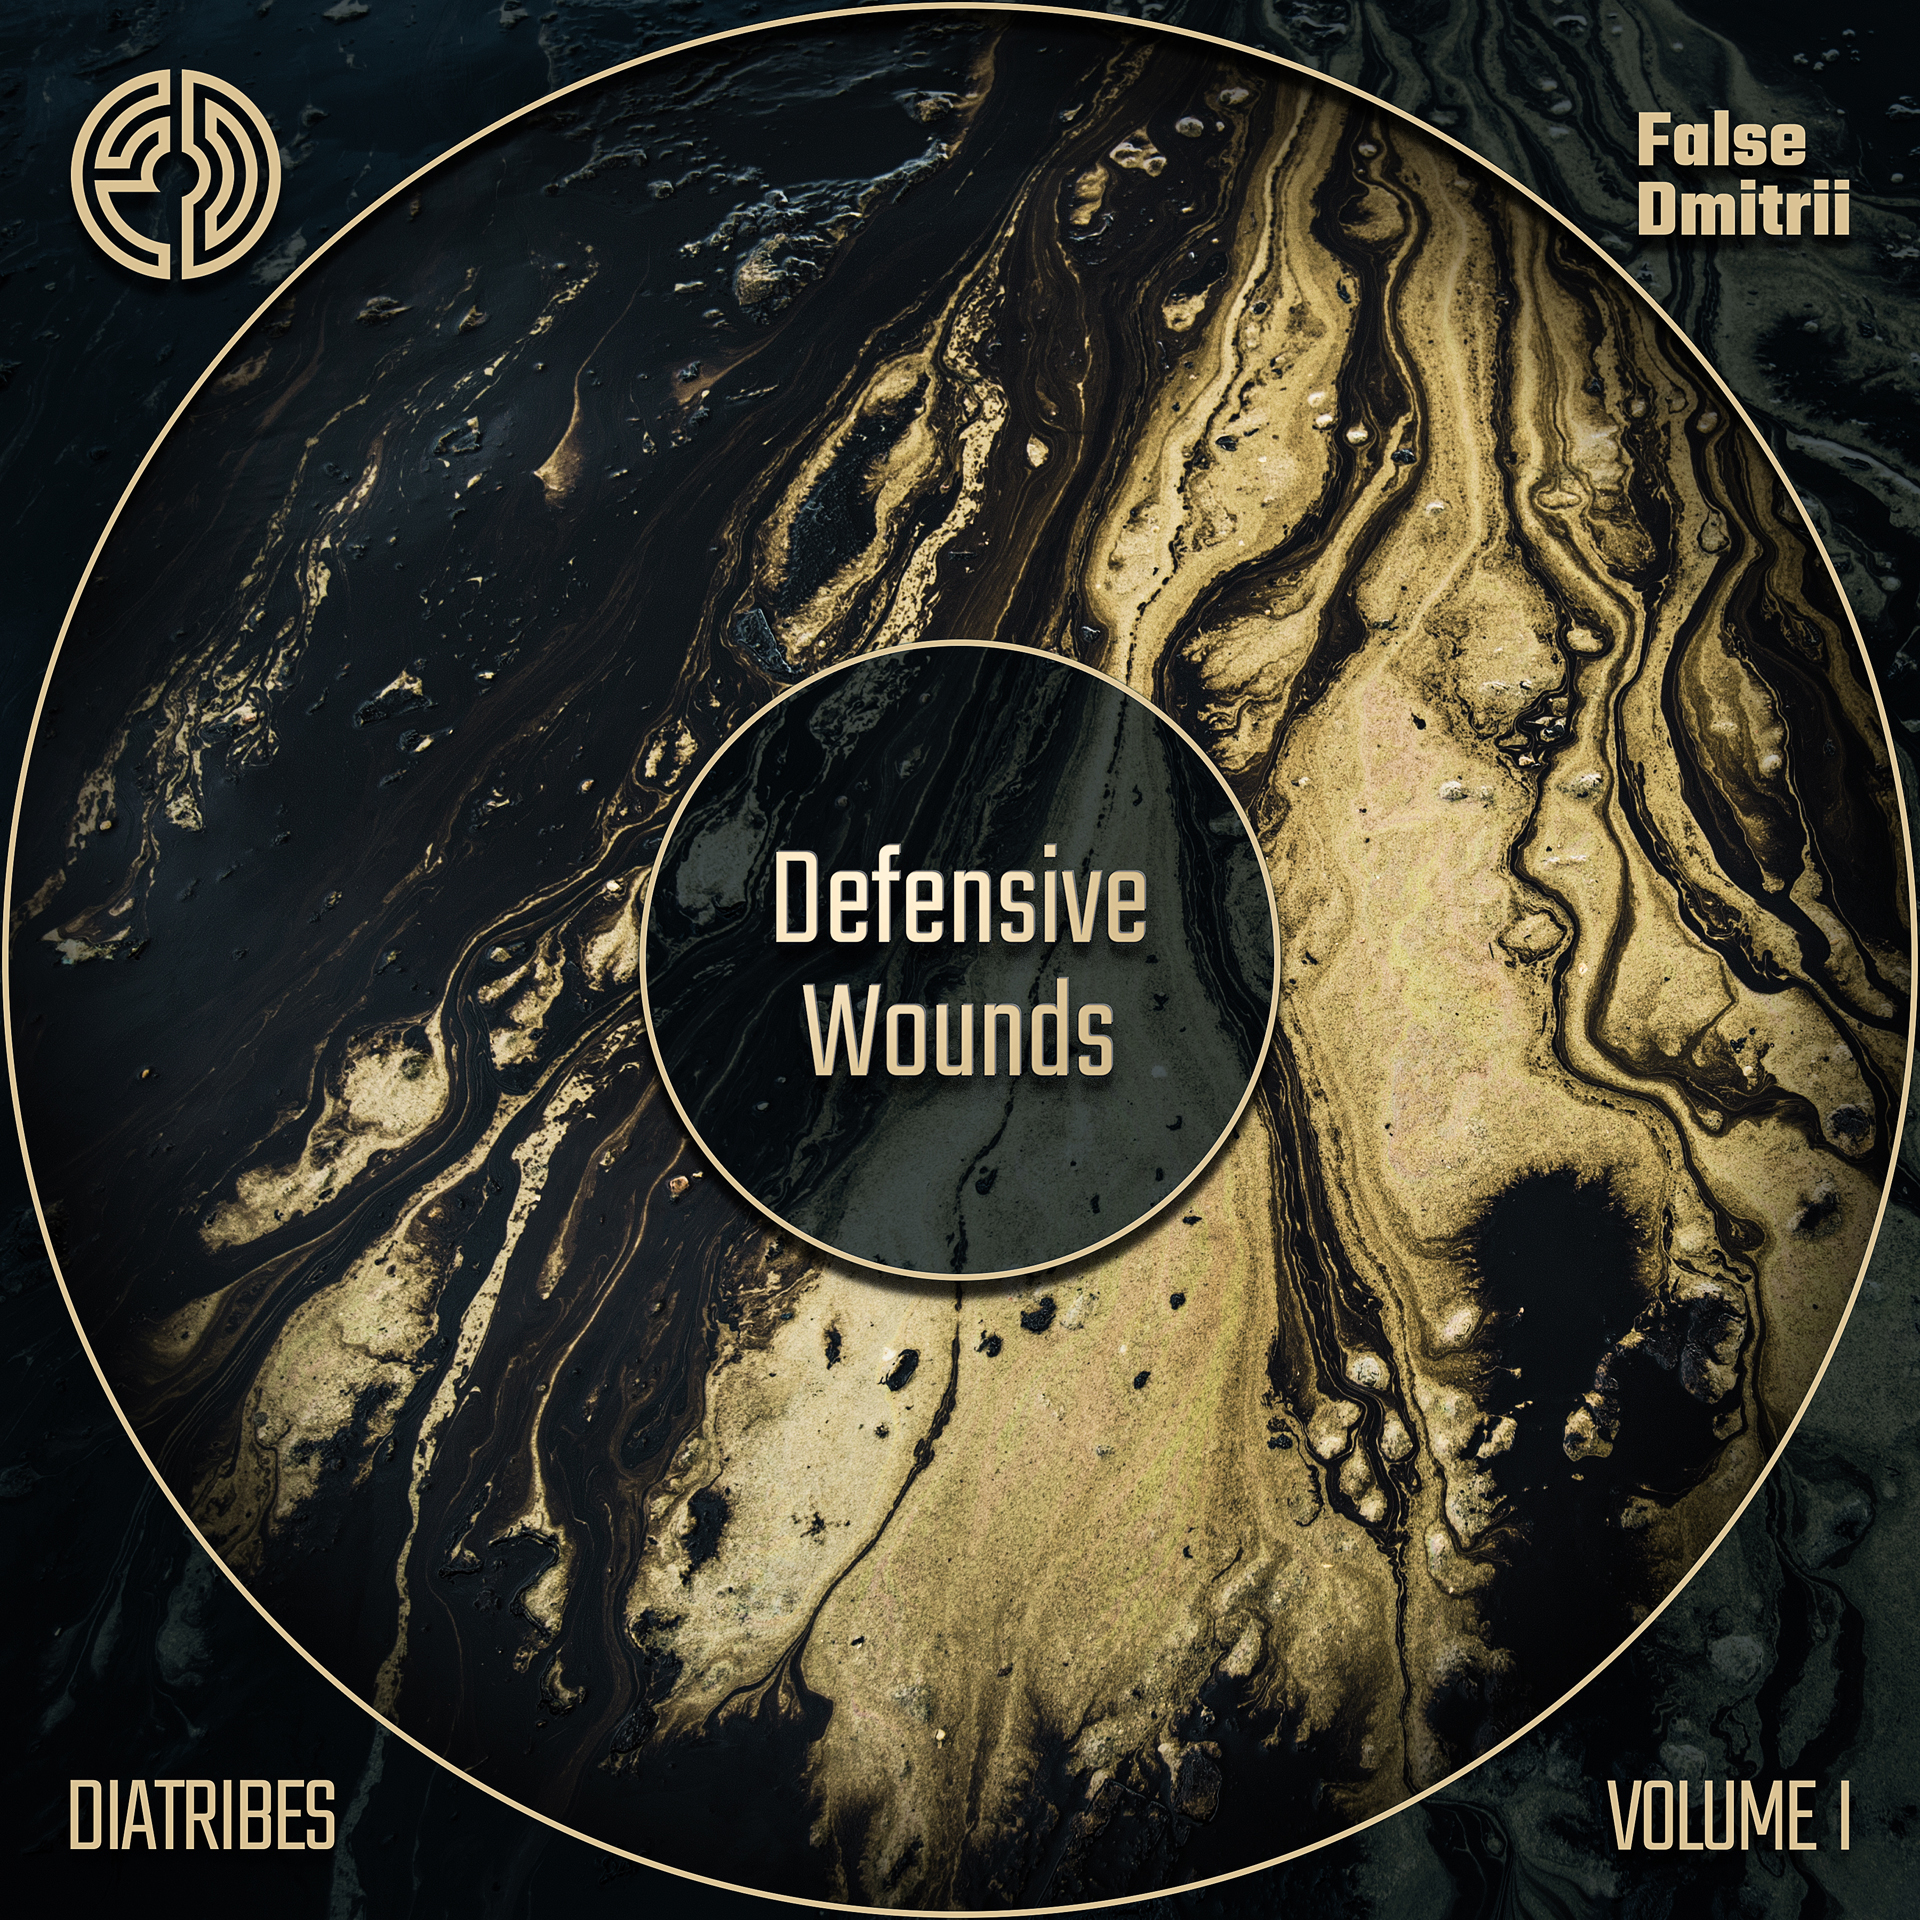 DIATRIBES: VOLUME I - Defensive Wounds